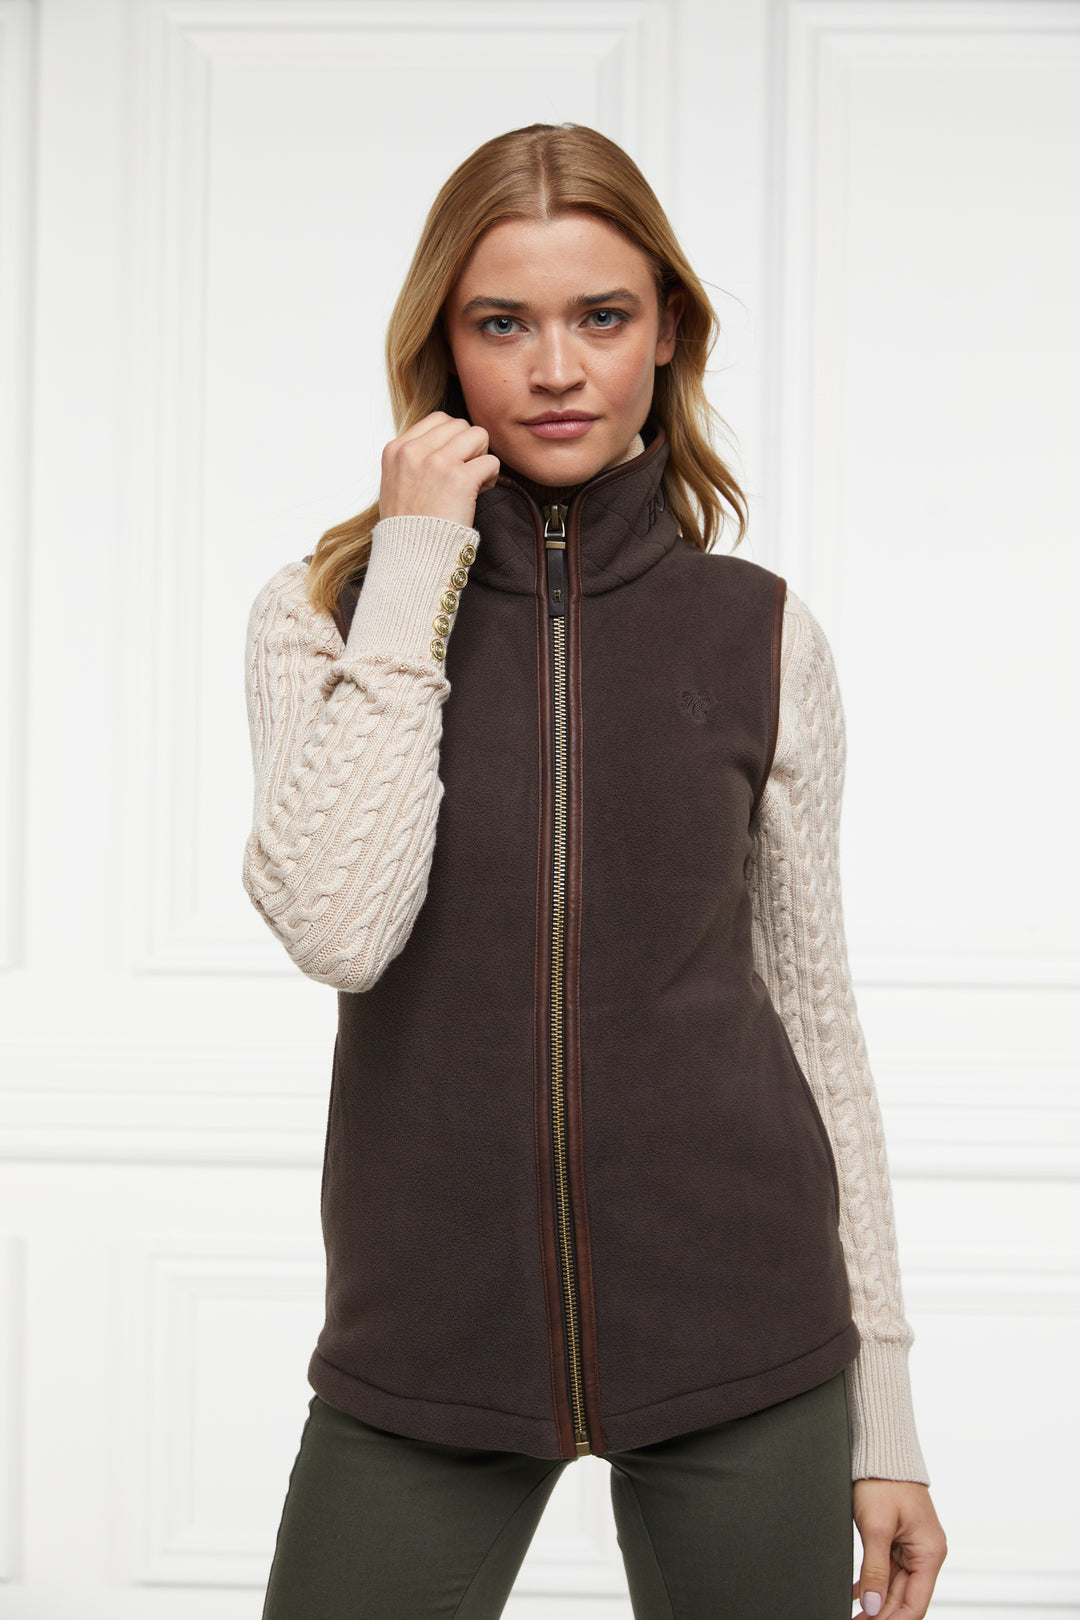 The Holland Cooper Ladies Country Fleece Gilet in chocolate#Chocolate